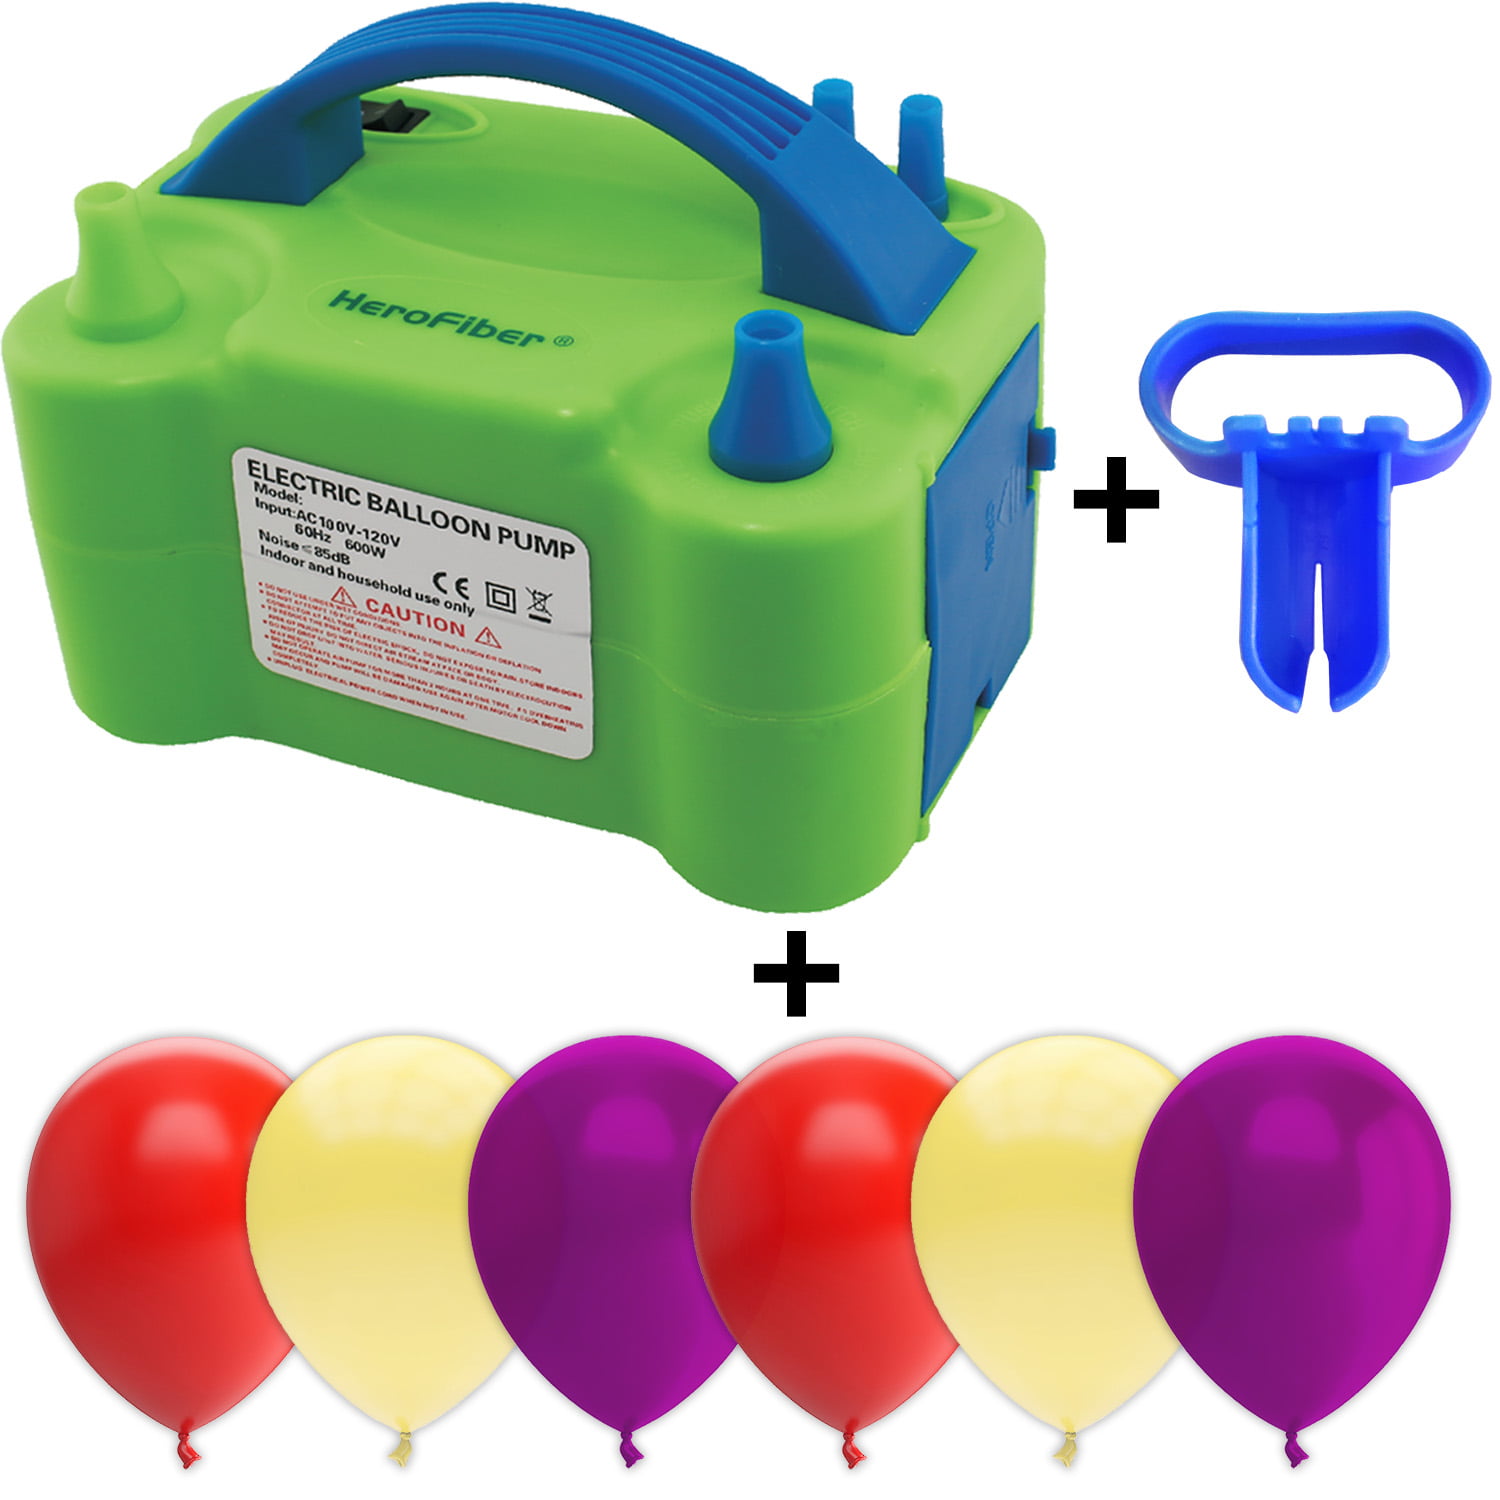 BALLOON PUMP DUAL ACTION GREAT FOR ALL SIZES TWISTING TYING QUALATEX BALLOONS 